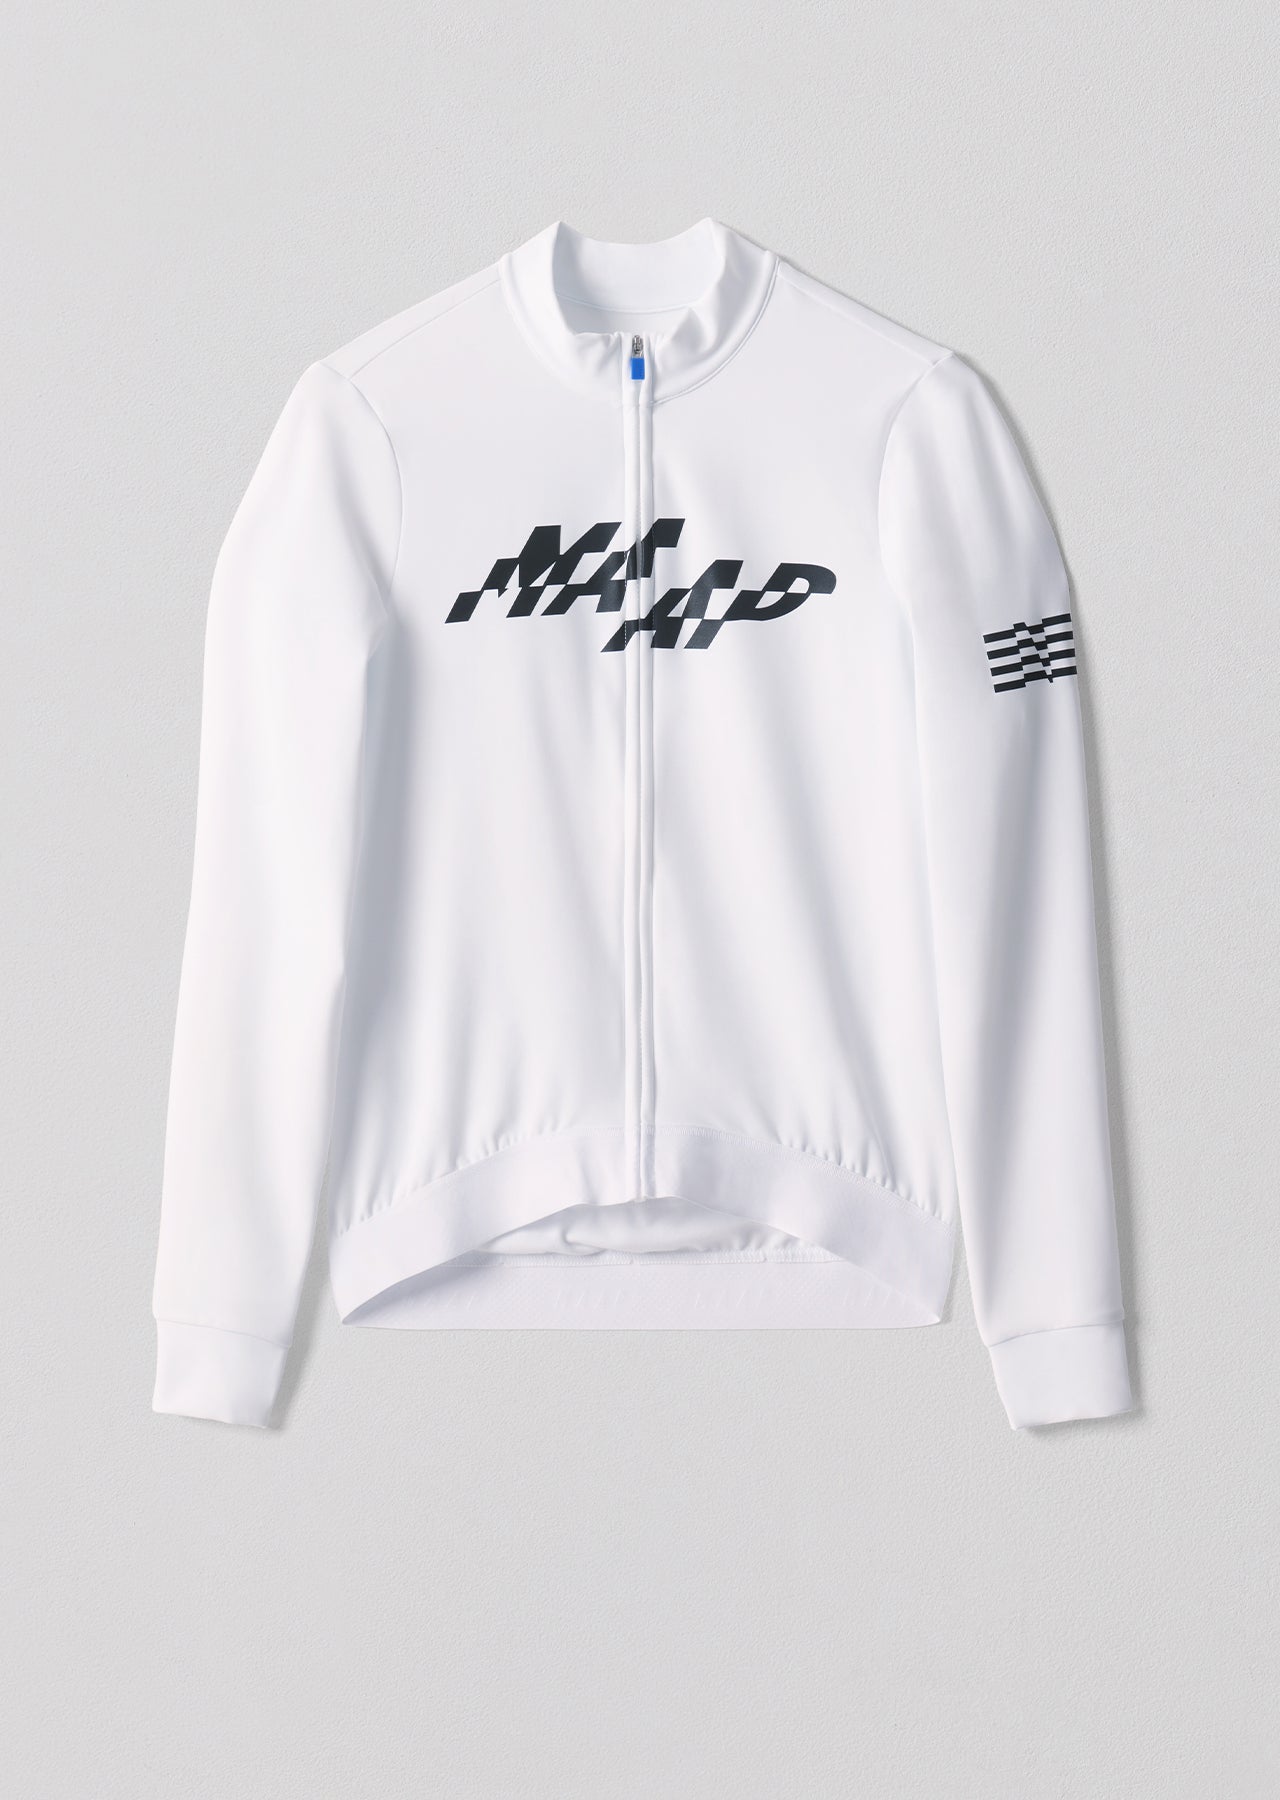 Women's Fragment Thermal LS Jersey 2.0